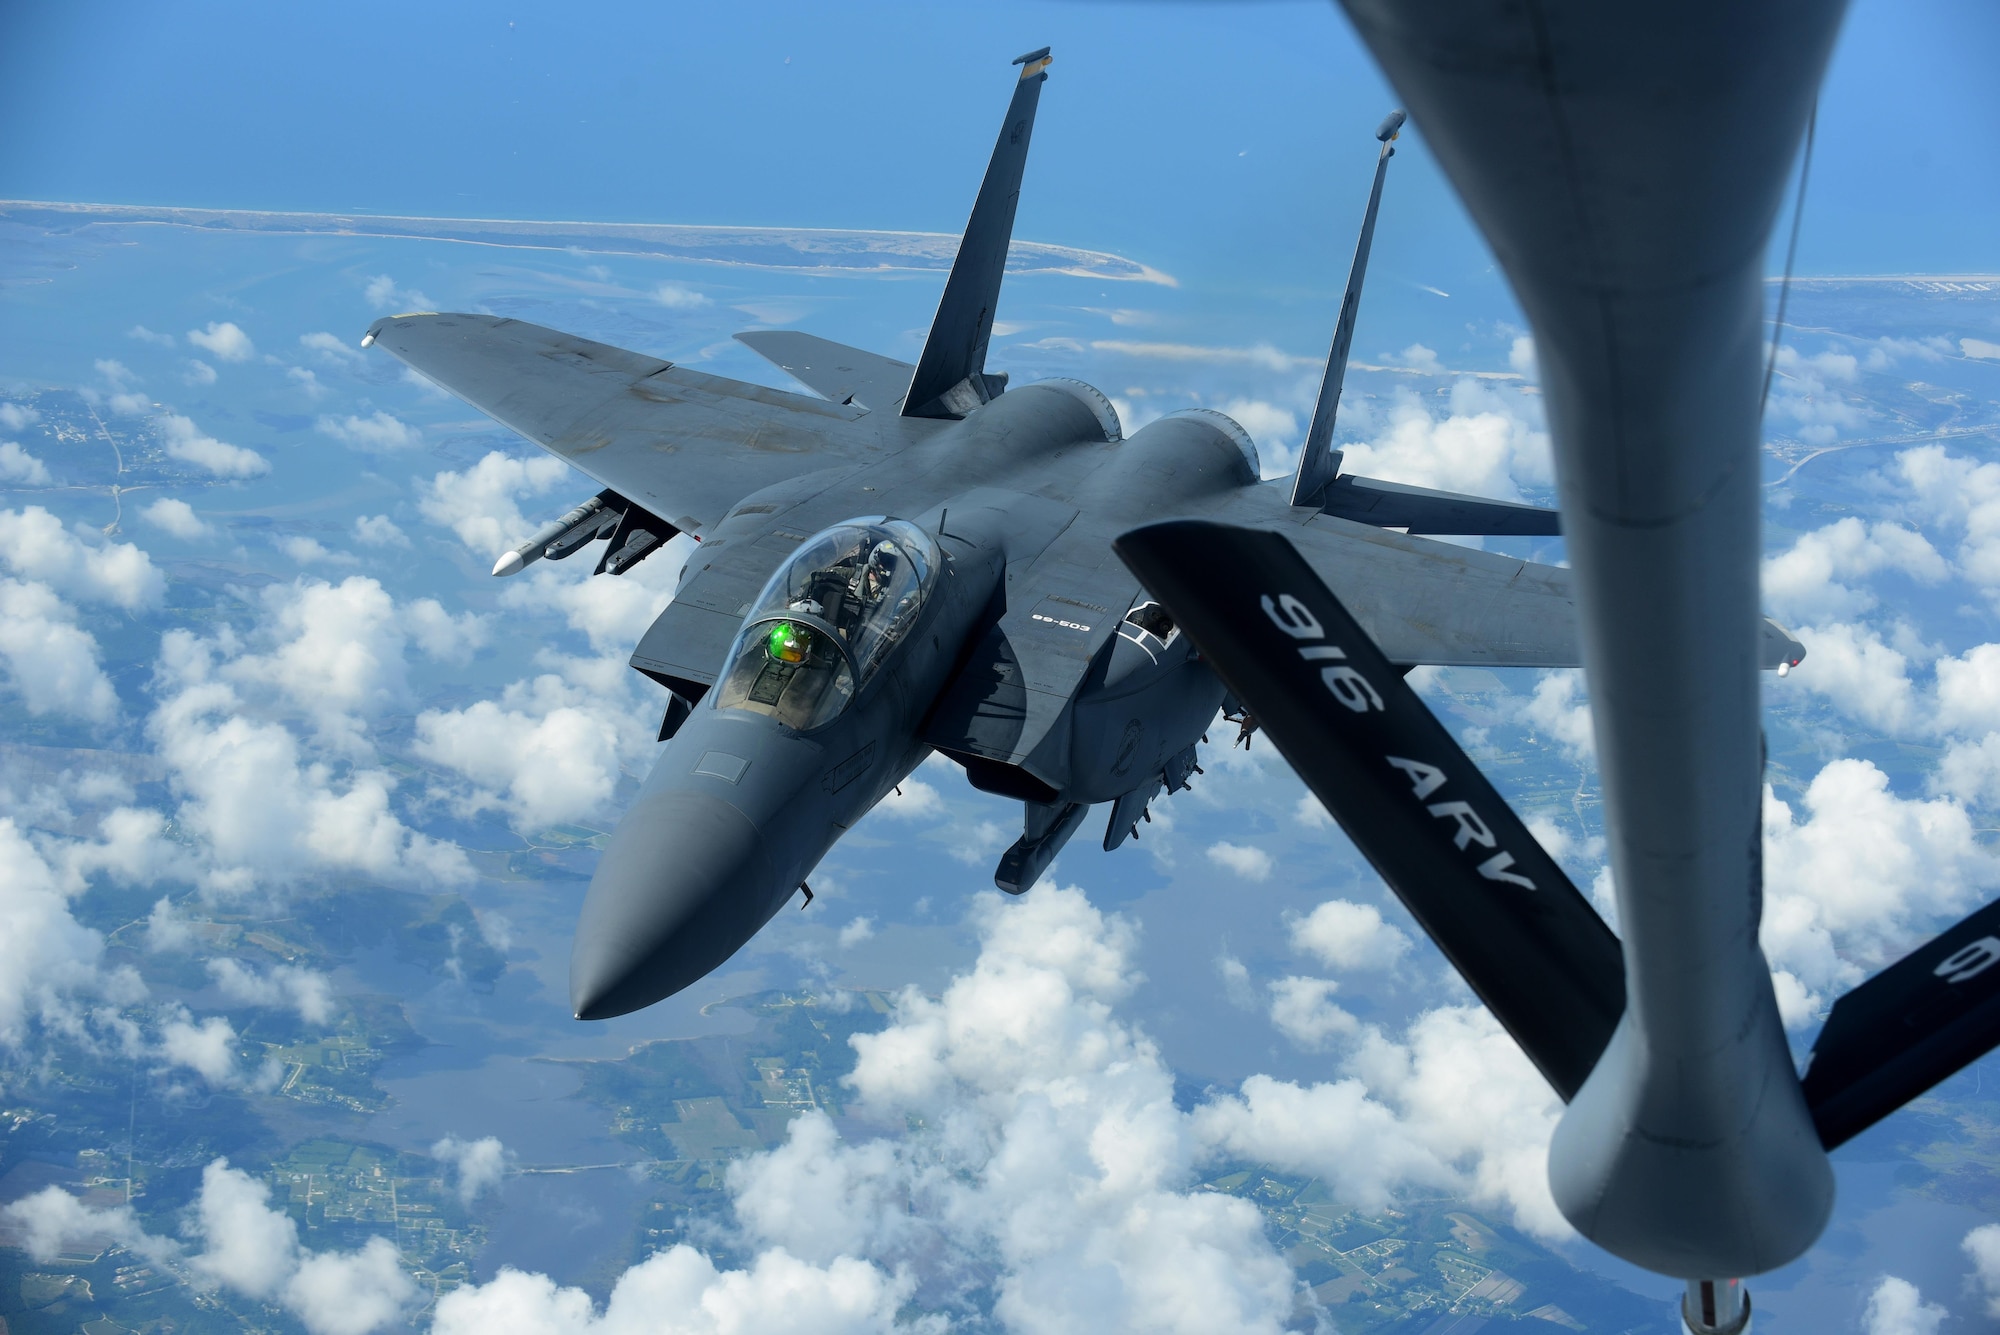 An F-15E Strike Eagle piloted by Col. Christopher Sage, 4th Fighter Wing commander, prepares to be refueled by a KC-135R Stratotanker, May 18, 2017, in the skies over Seymour Johnson Air Force Base, North Carolina. The boom is the fastest way to refuel aircraft at 1,200 gallons per minute. (U.S. Air Force photo by Airman 1st Class Kenneth Boyton)